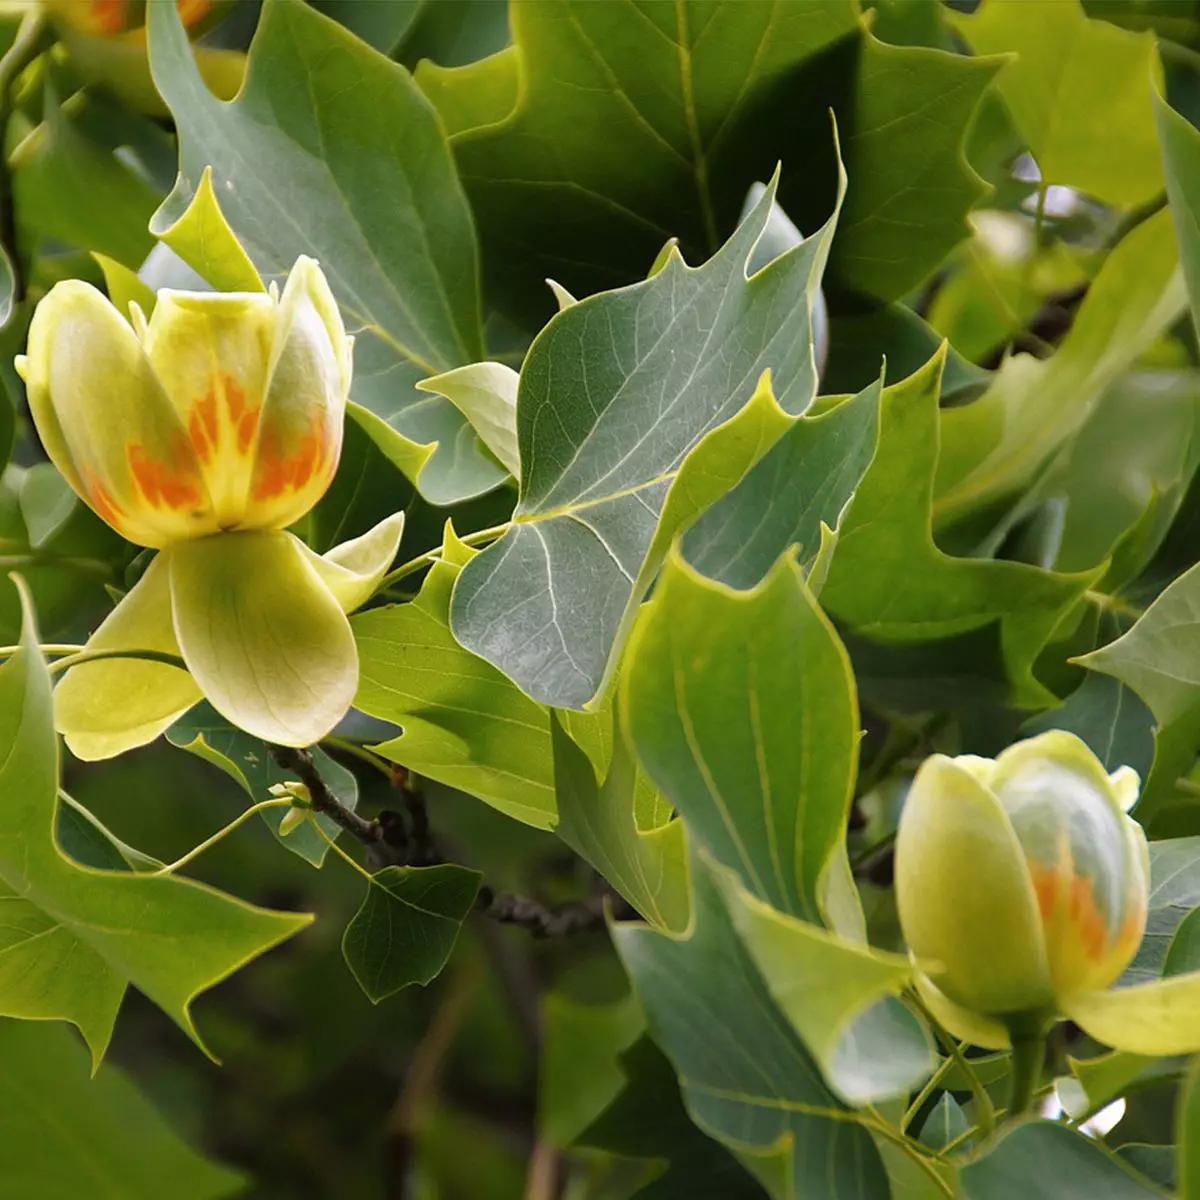 Tulip Poplar for Sale   Buying & Growing Guide   Trees.com